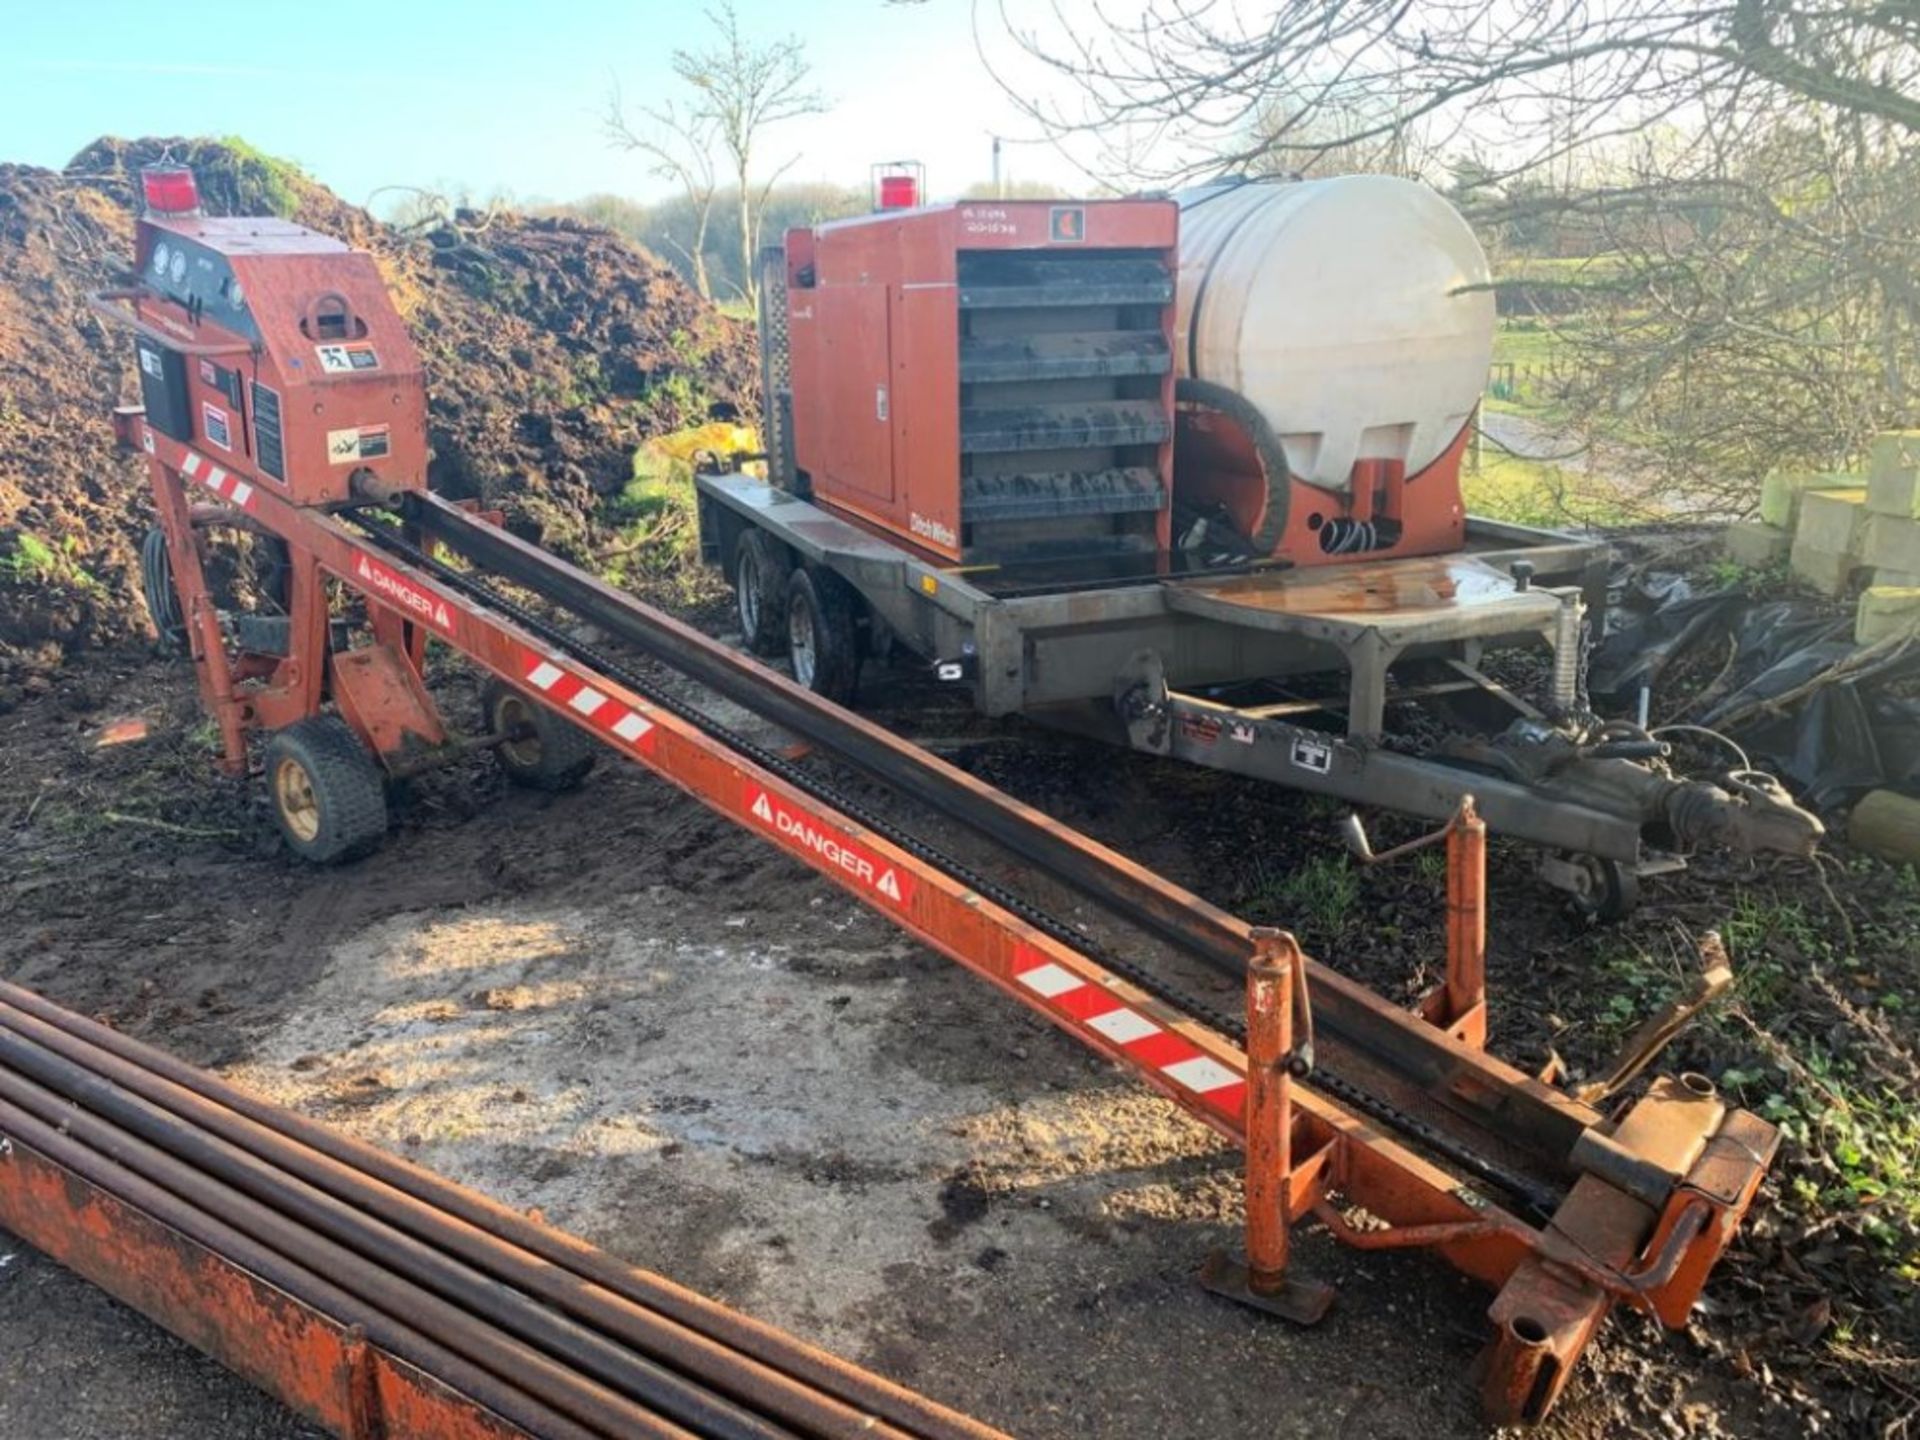 DITCH WITCH JET TRAC 440 DIRECTIONAL DRILLING BORING MACHINE. SUPPLIED WITH POWER PAC 40 HYDRAULIC